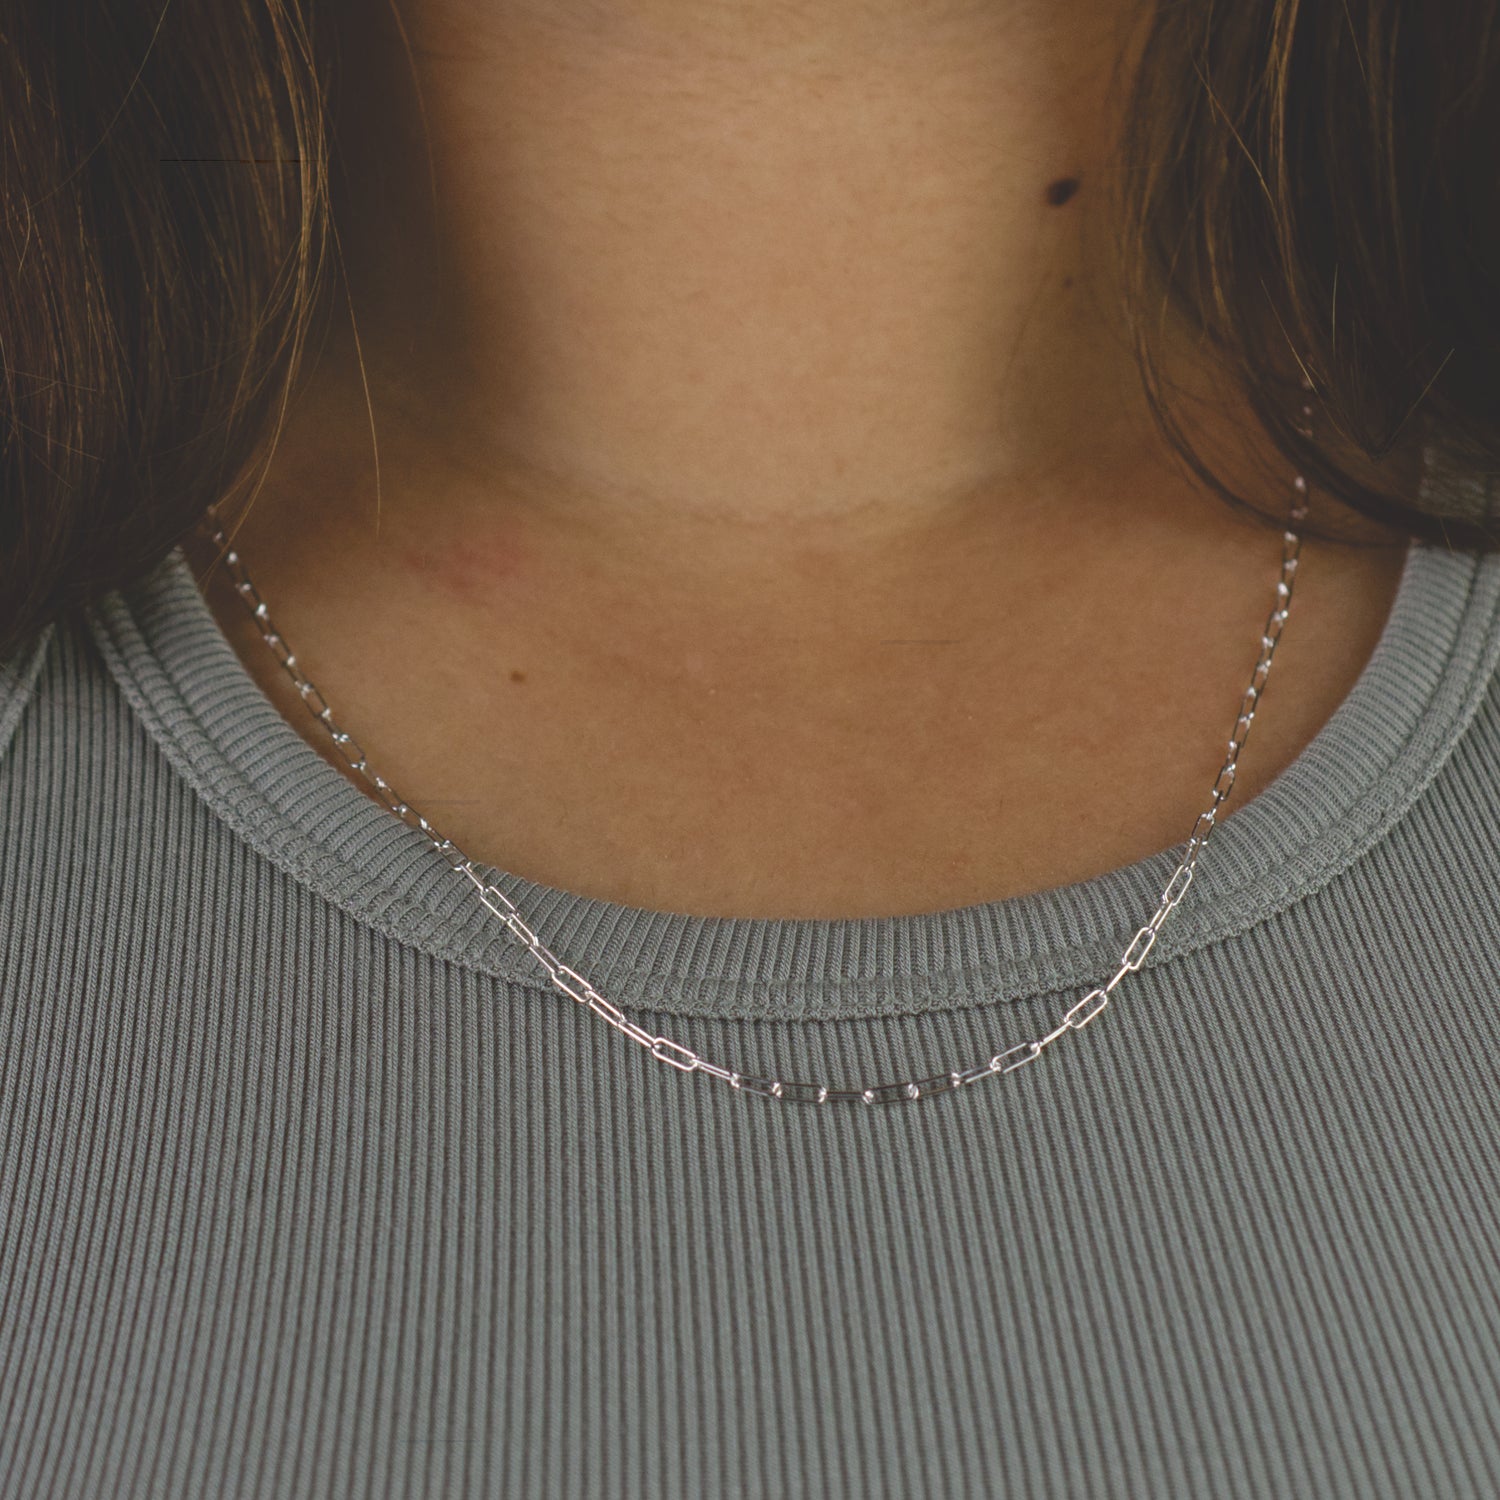 Woman wearing a 925 Sterling Silver paperclip chain necklace with minimalist style (small) link size